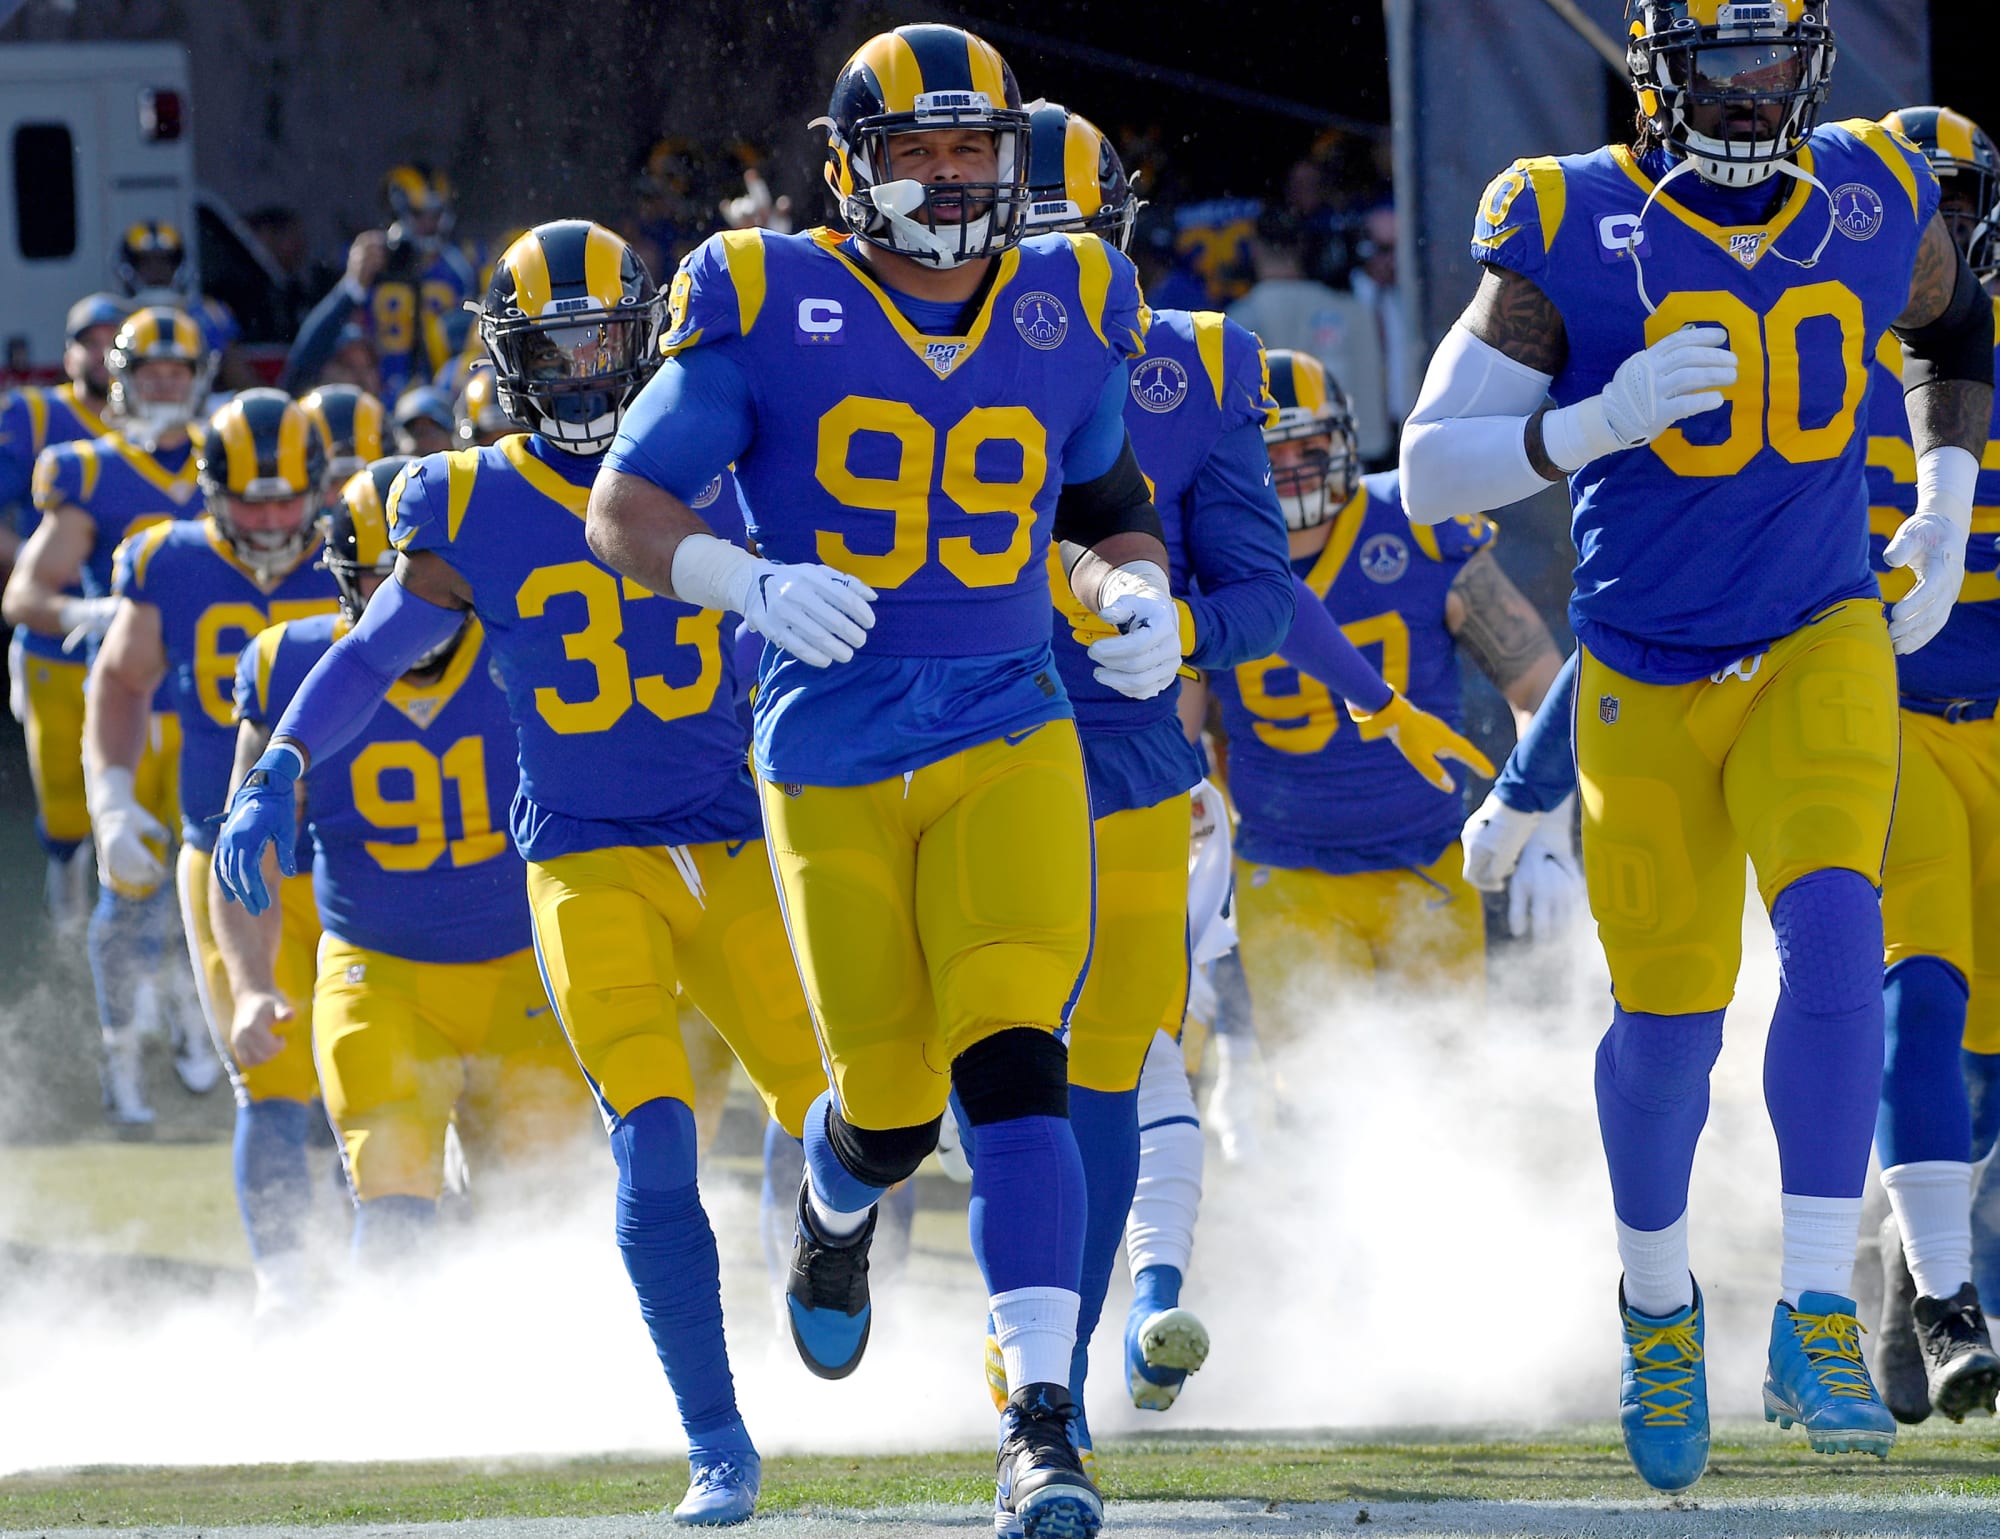 LA Rams have the recipe to go on an undefeated streak